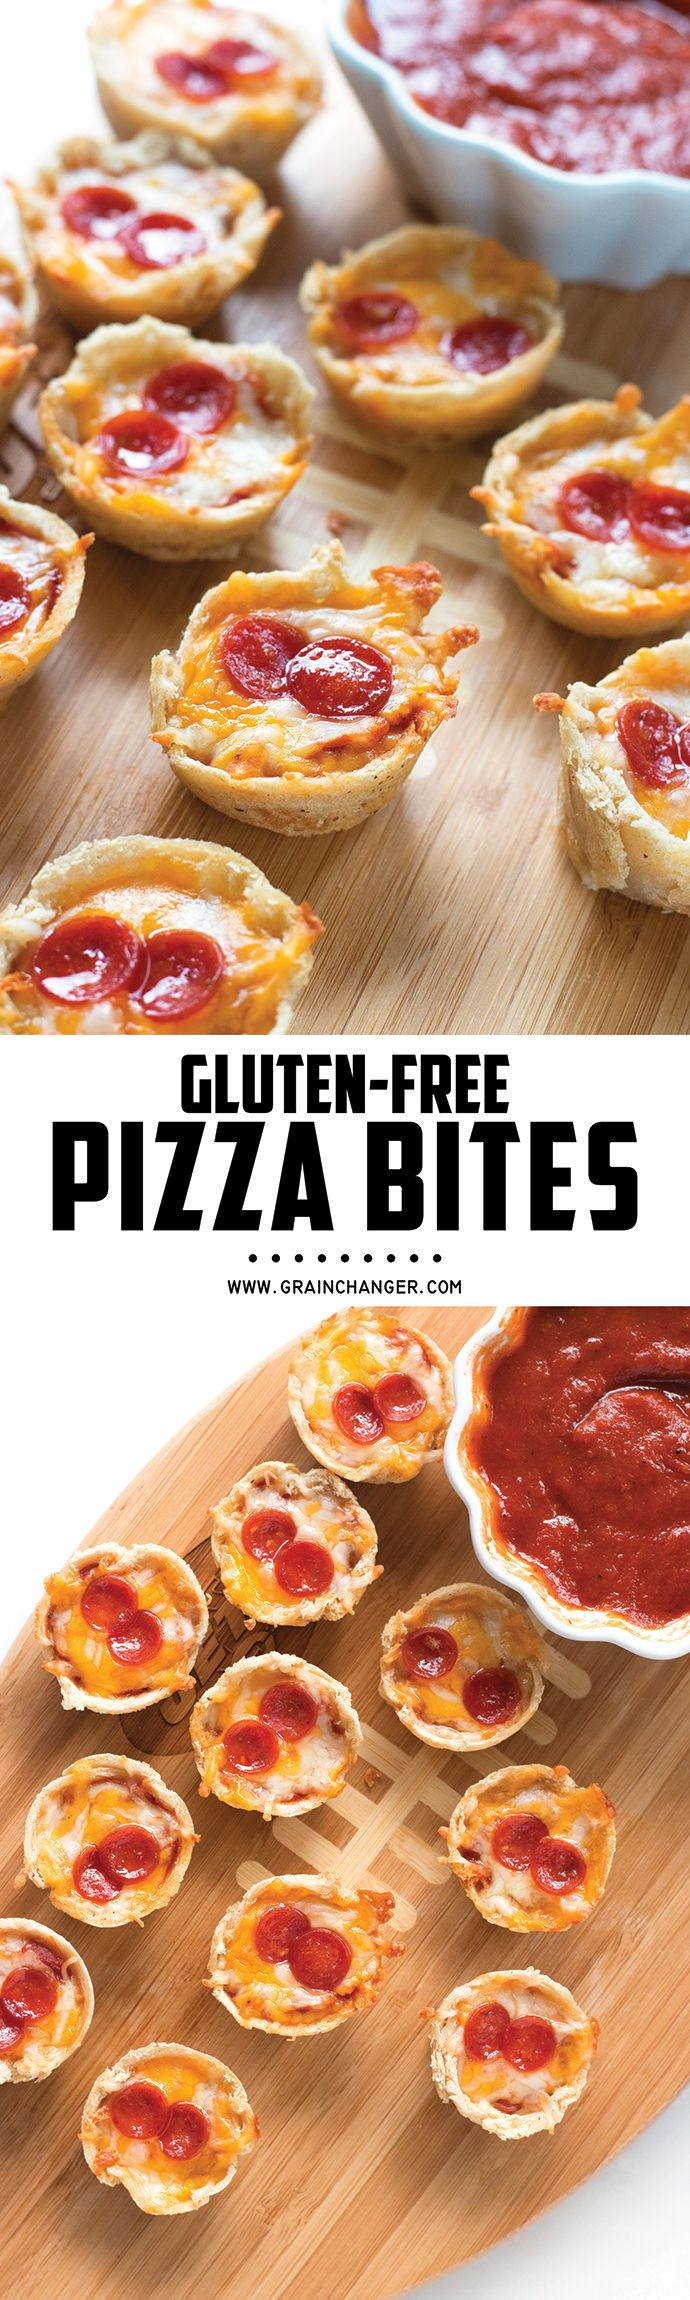 Gluten And Dairy Free Appetizers
 Gluten Free Pizza Bites Recipe